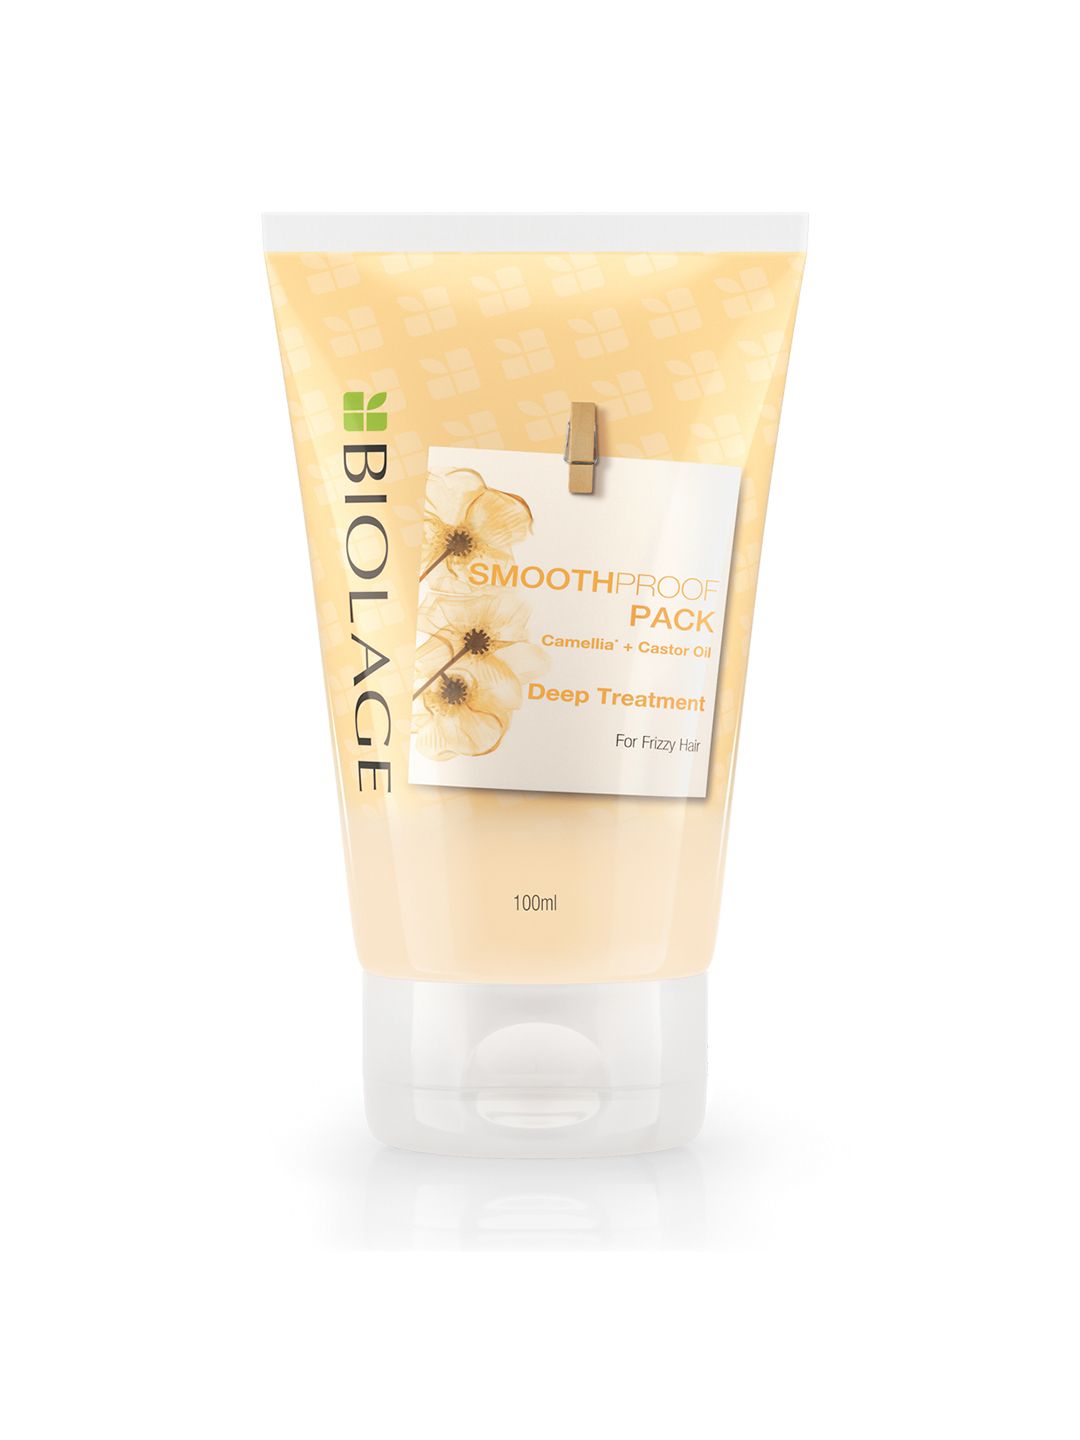 Biolage Smooth Proof Camellia & Castor Oil Deep Treatment Hair Mask - 100 ml Price in India